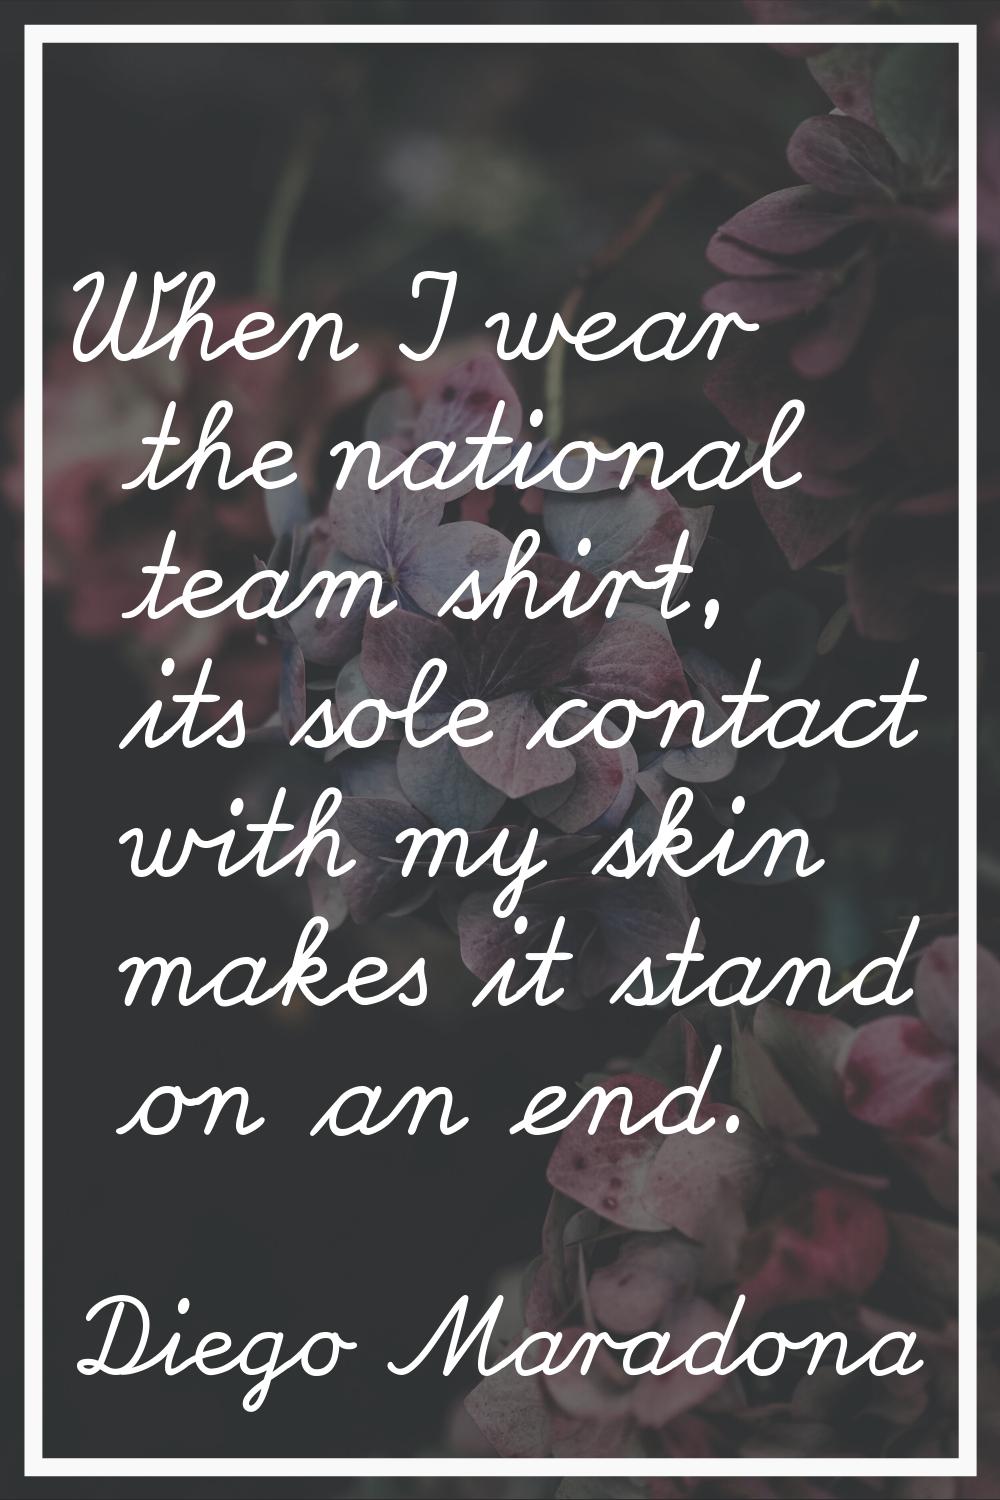 When I wear the national team shirt, its sole contact with my skin makes it stand on an end.